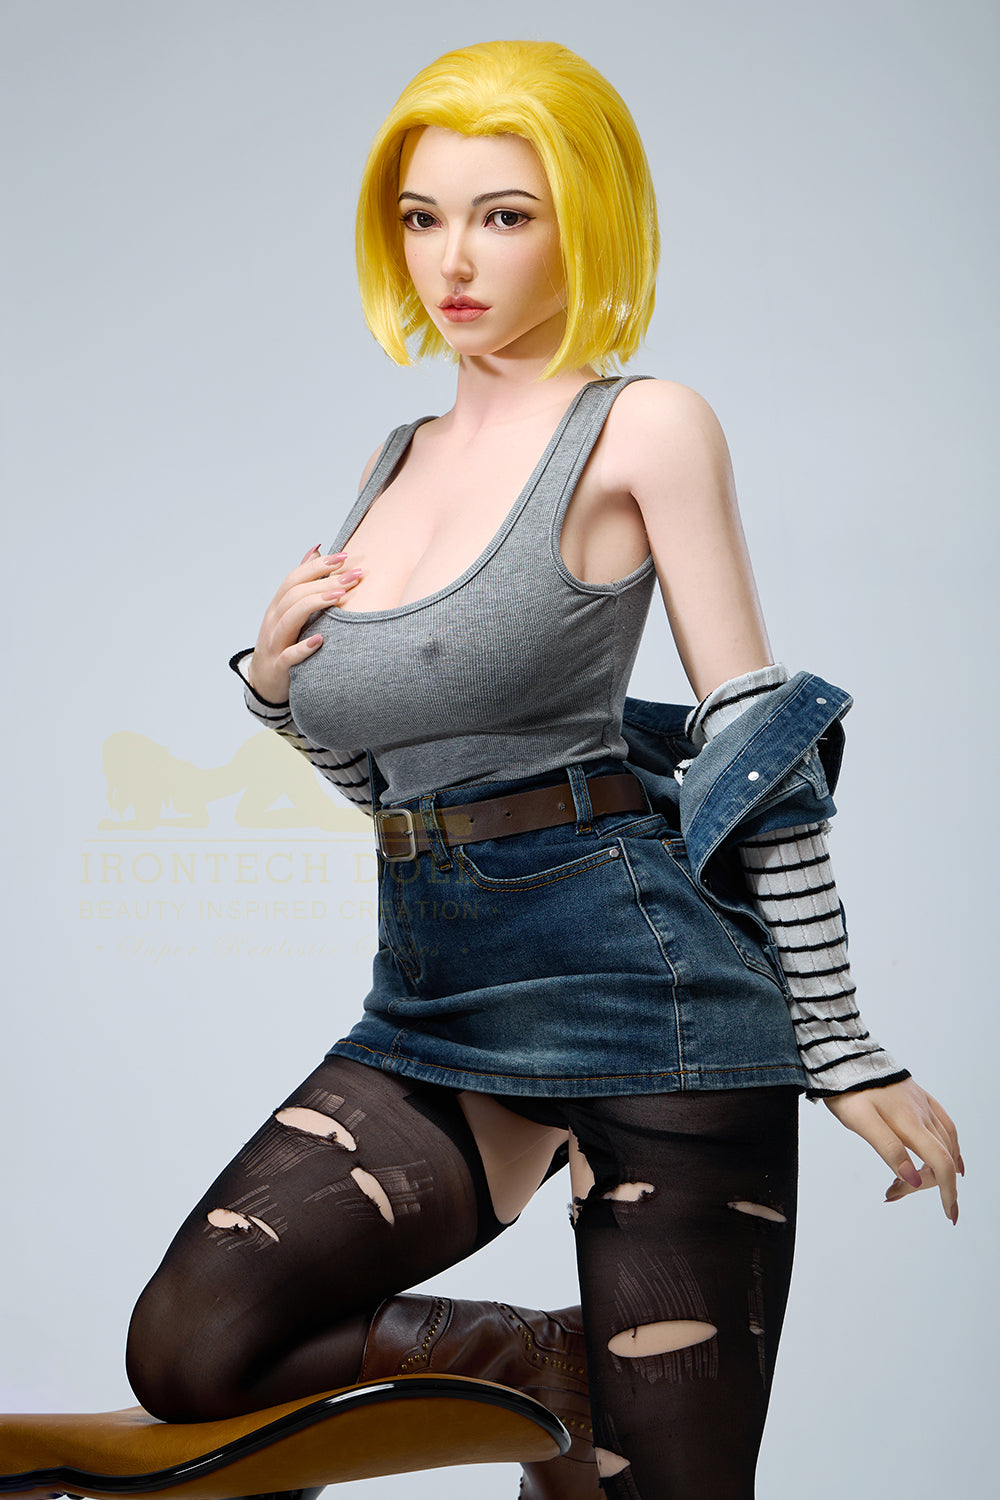 Irontechdoll Poppy 5ft21/ 159cm #S41 Head Full Silicone MILF  Big Breasts Fat Ass Sex Doll